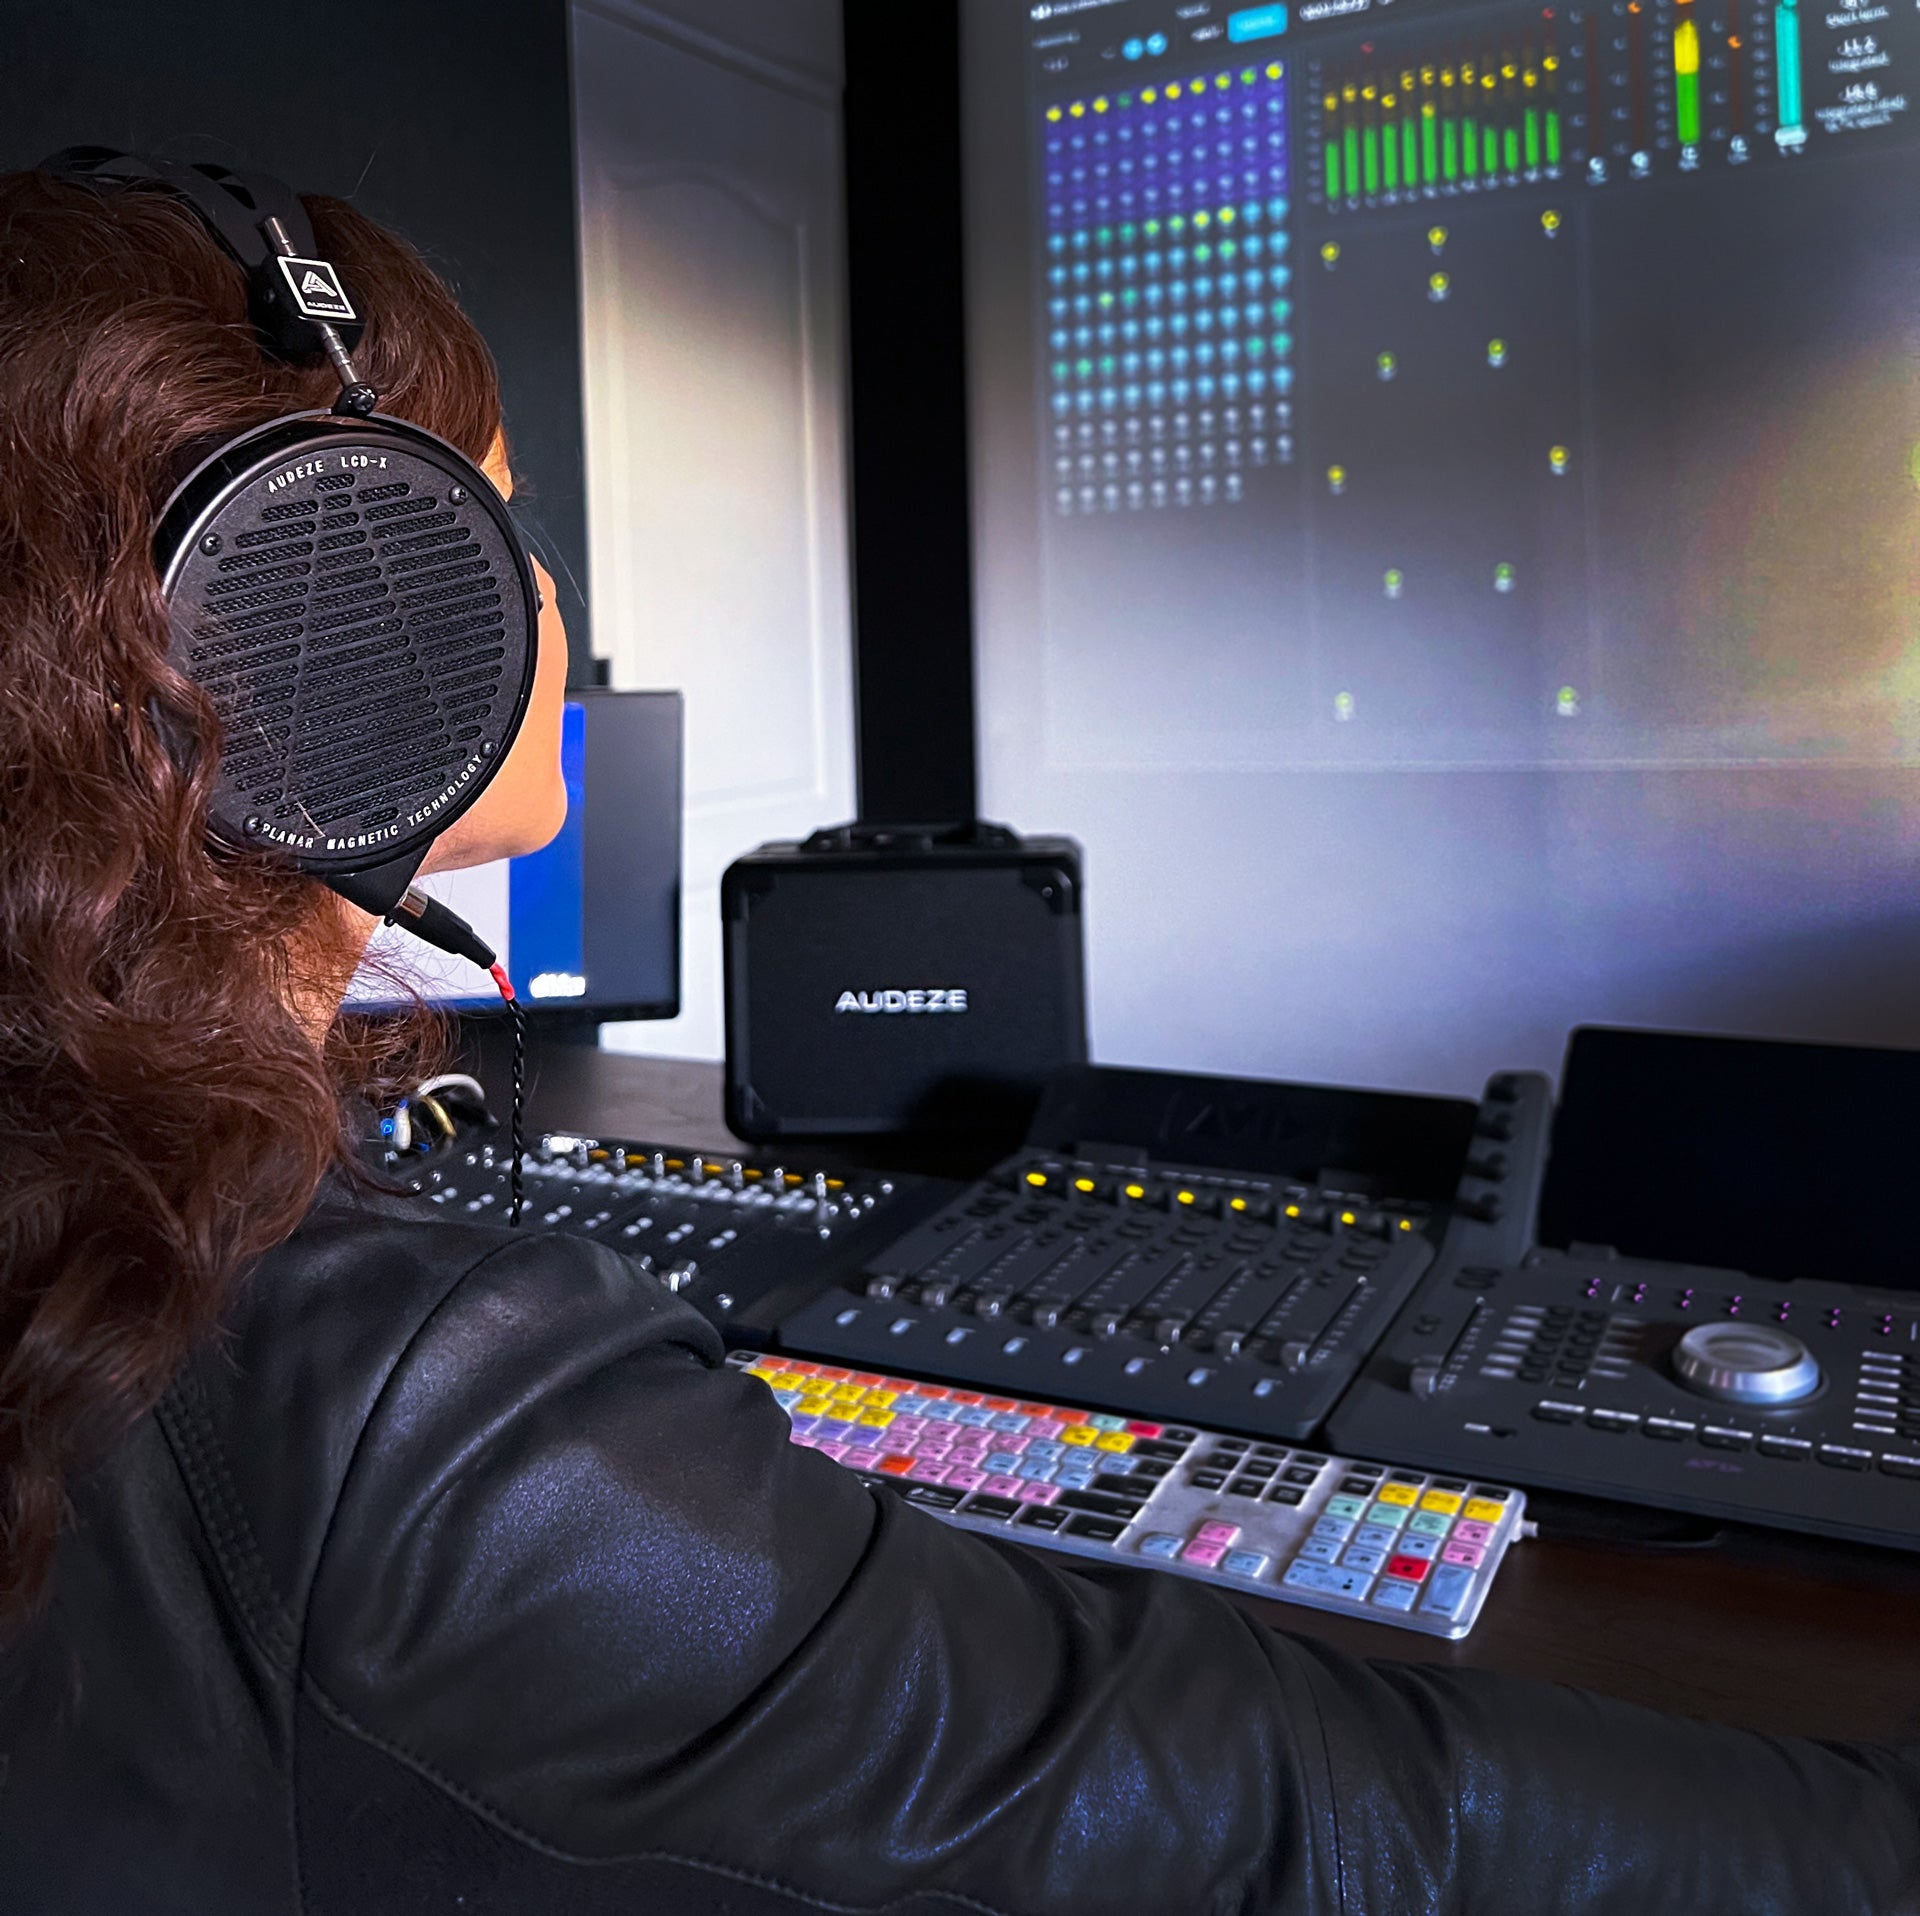 Carolina Antón at work with her LCD-X headphones